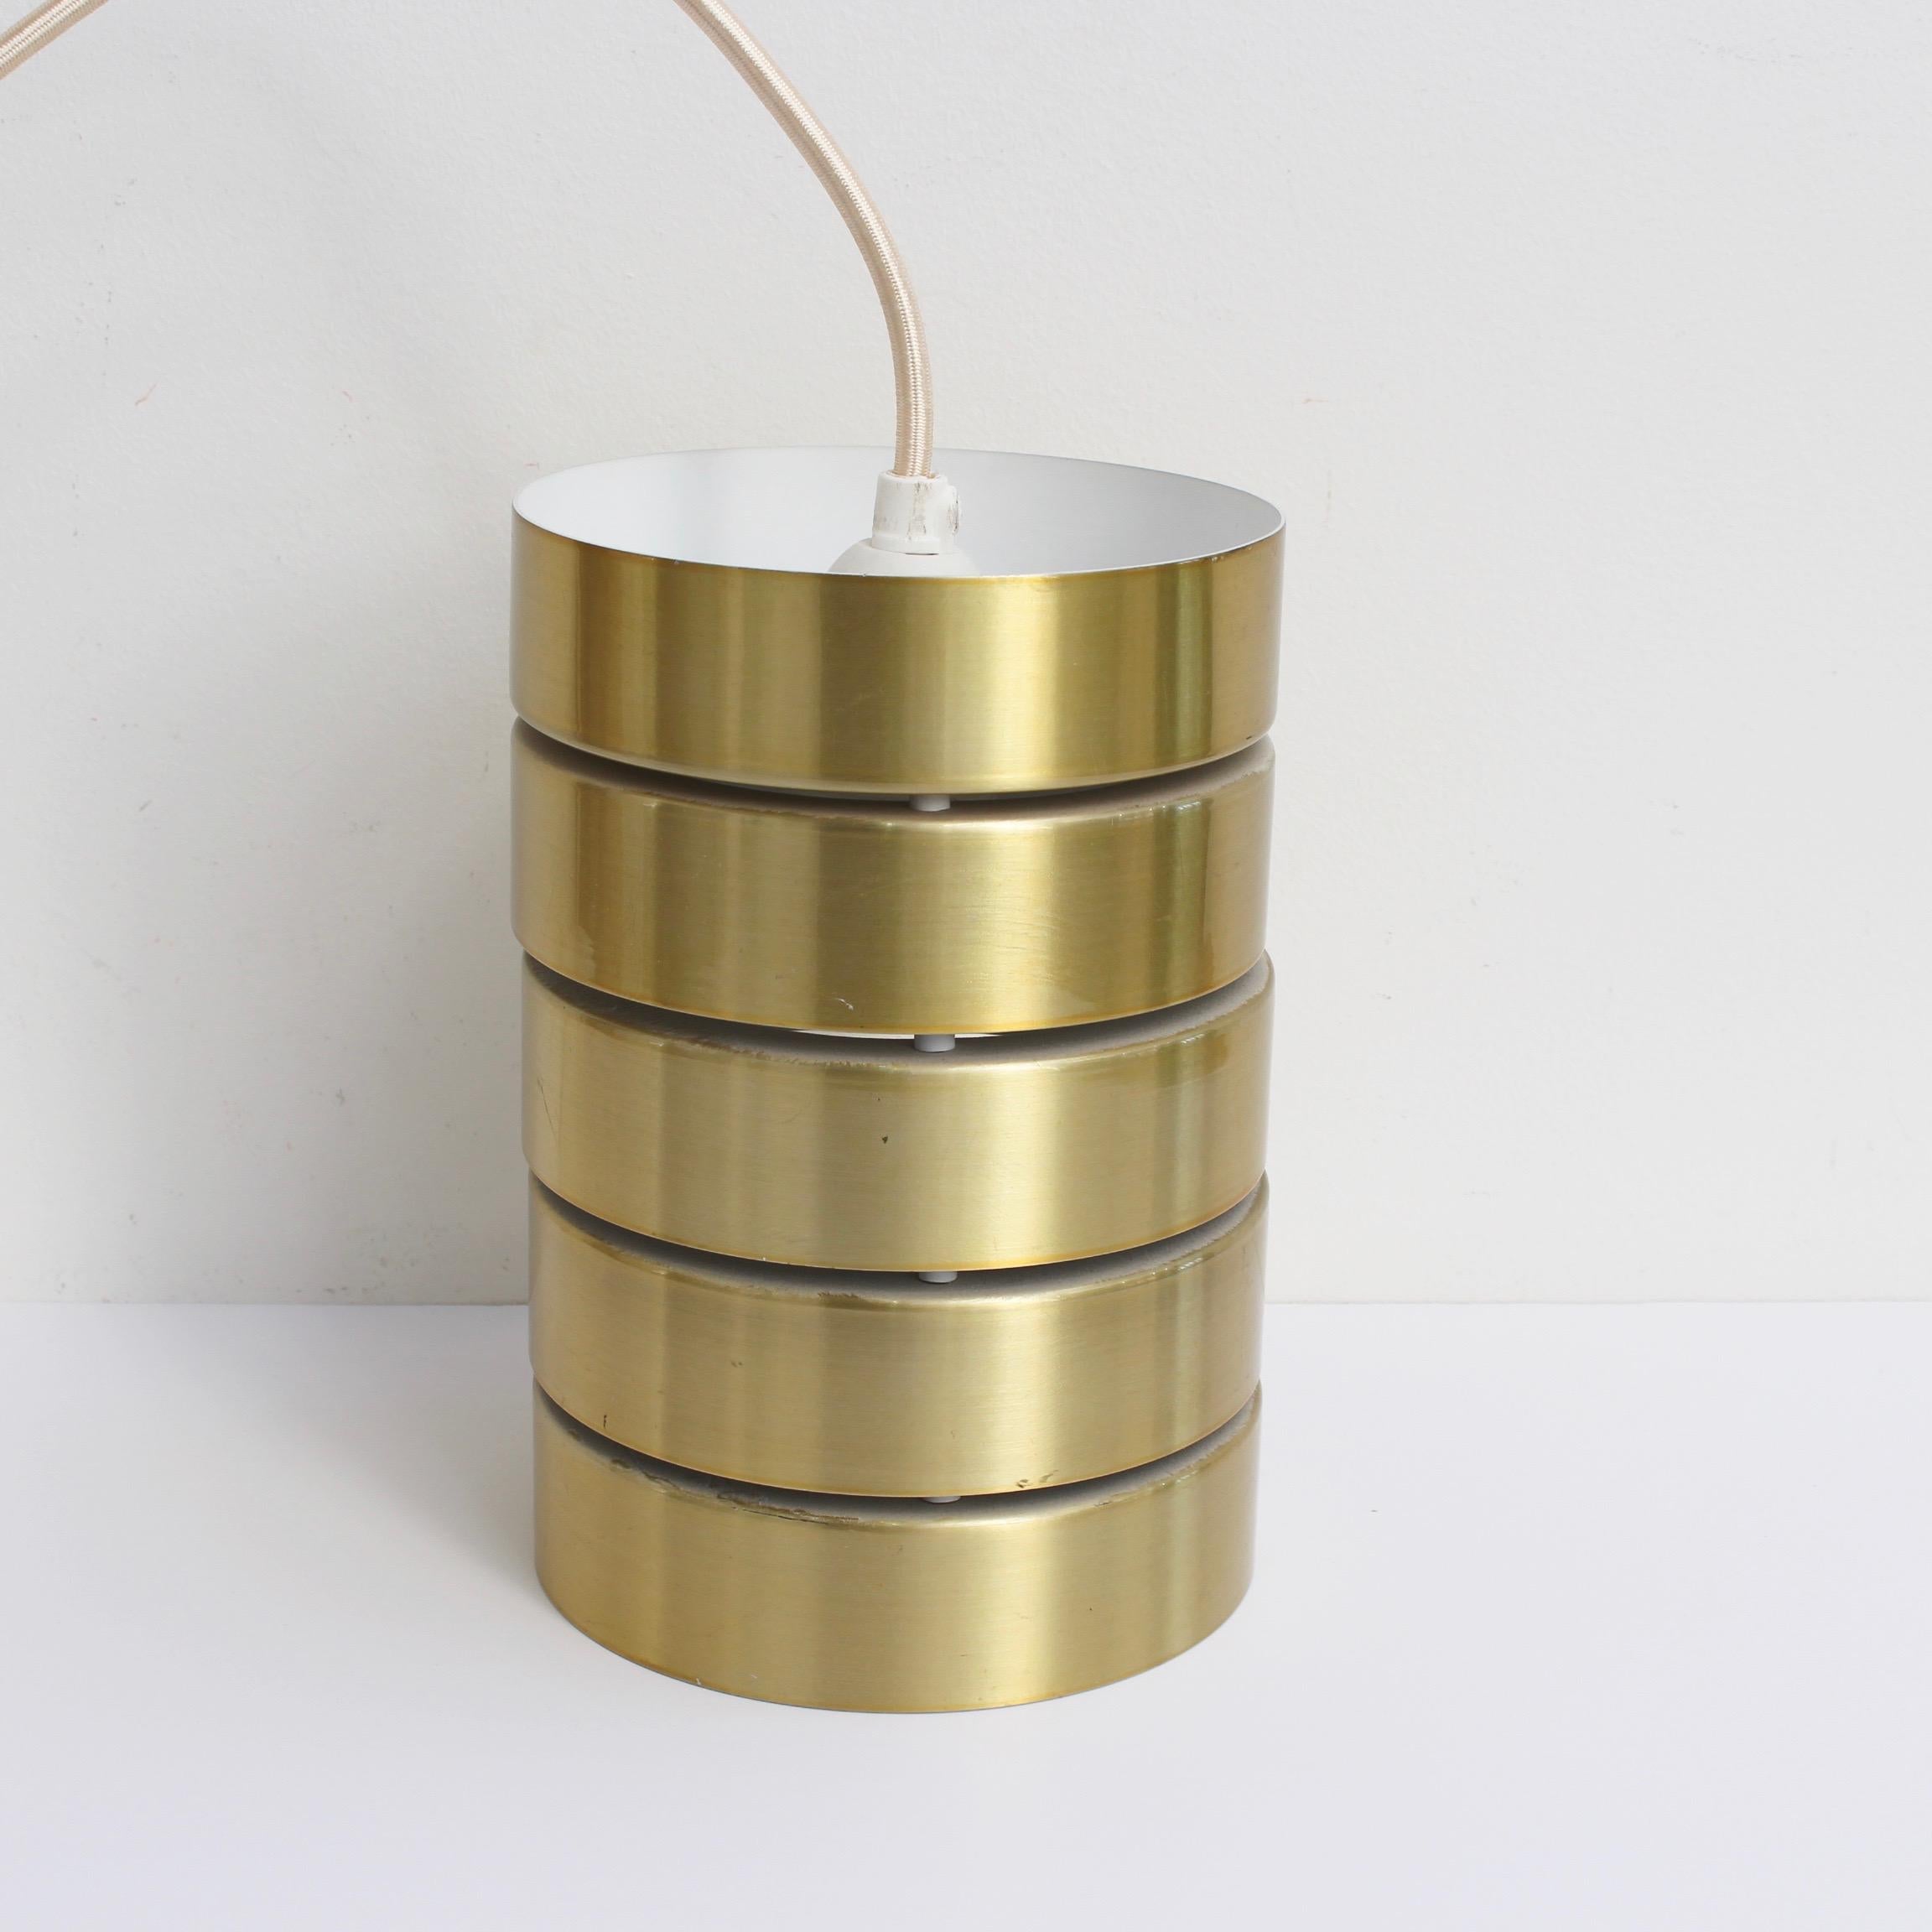 Mid-Century Modern Scandinavian ceiling light fixture (circa 1960s). Layered, polished brass-plated rings form the body and structure of the piece. Quintessentially Modern Scandinavian look completely rewired to modern specifications. In overall